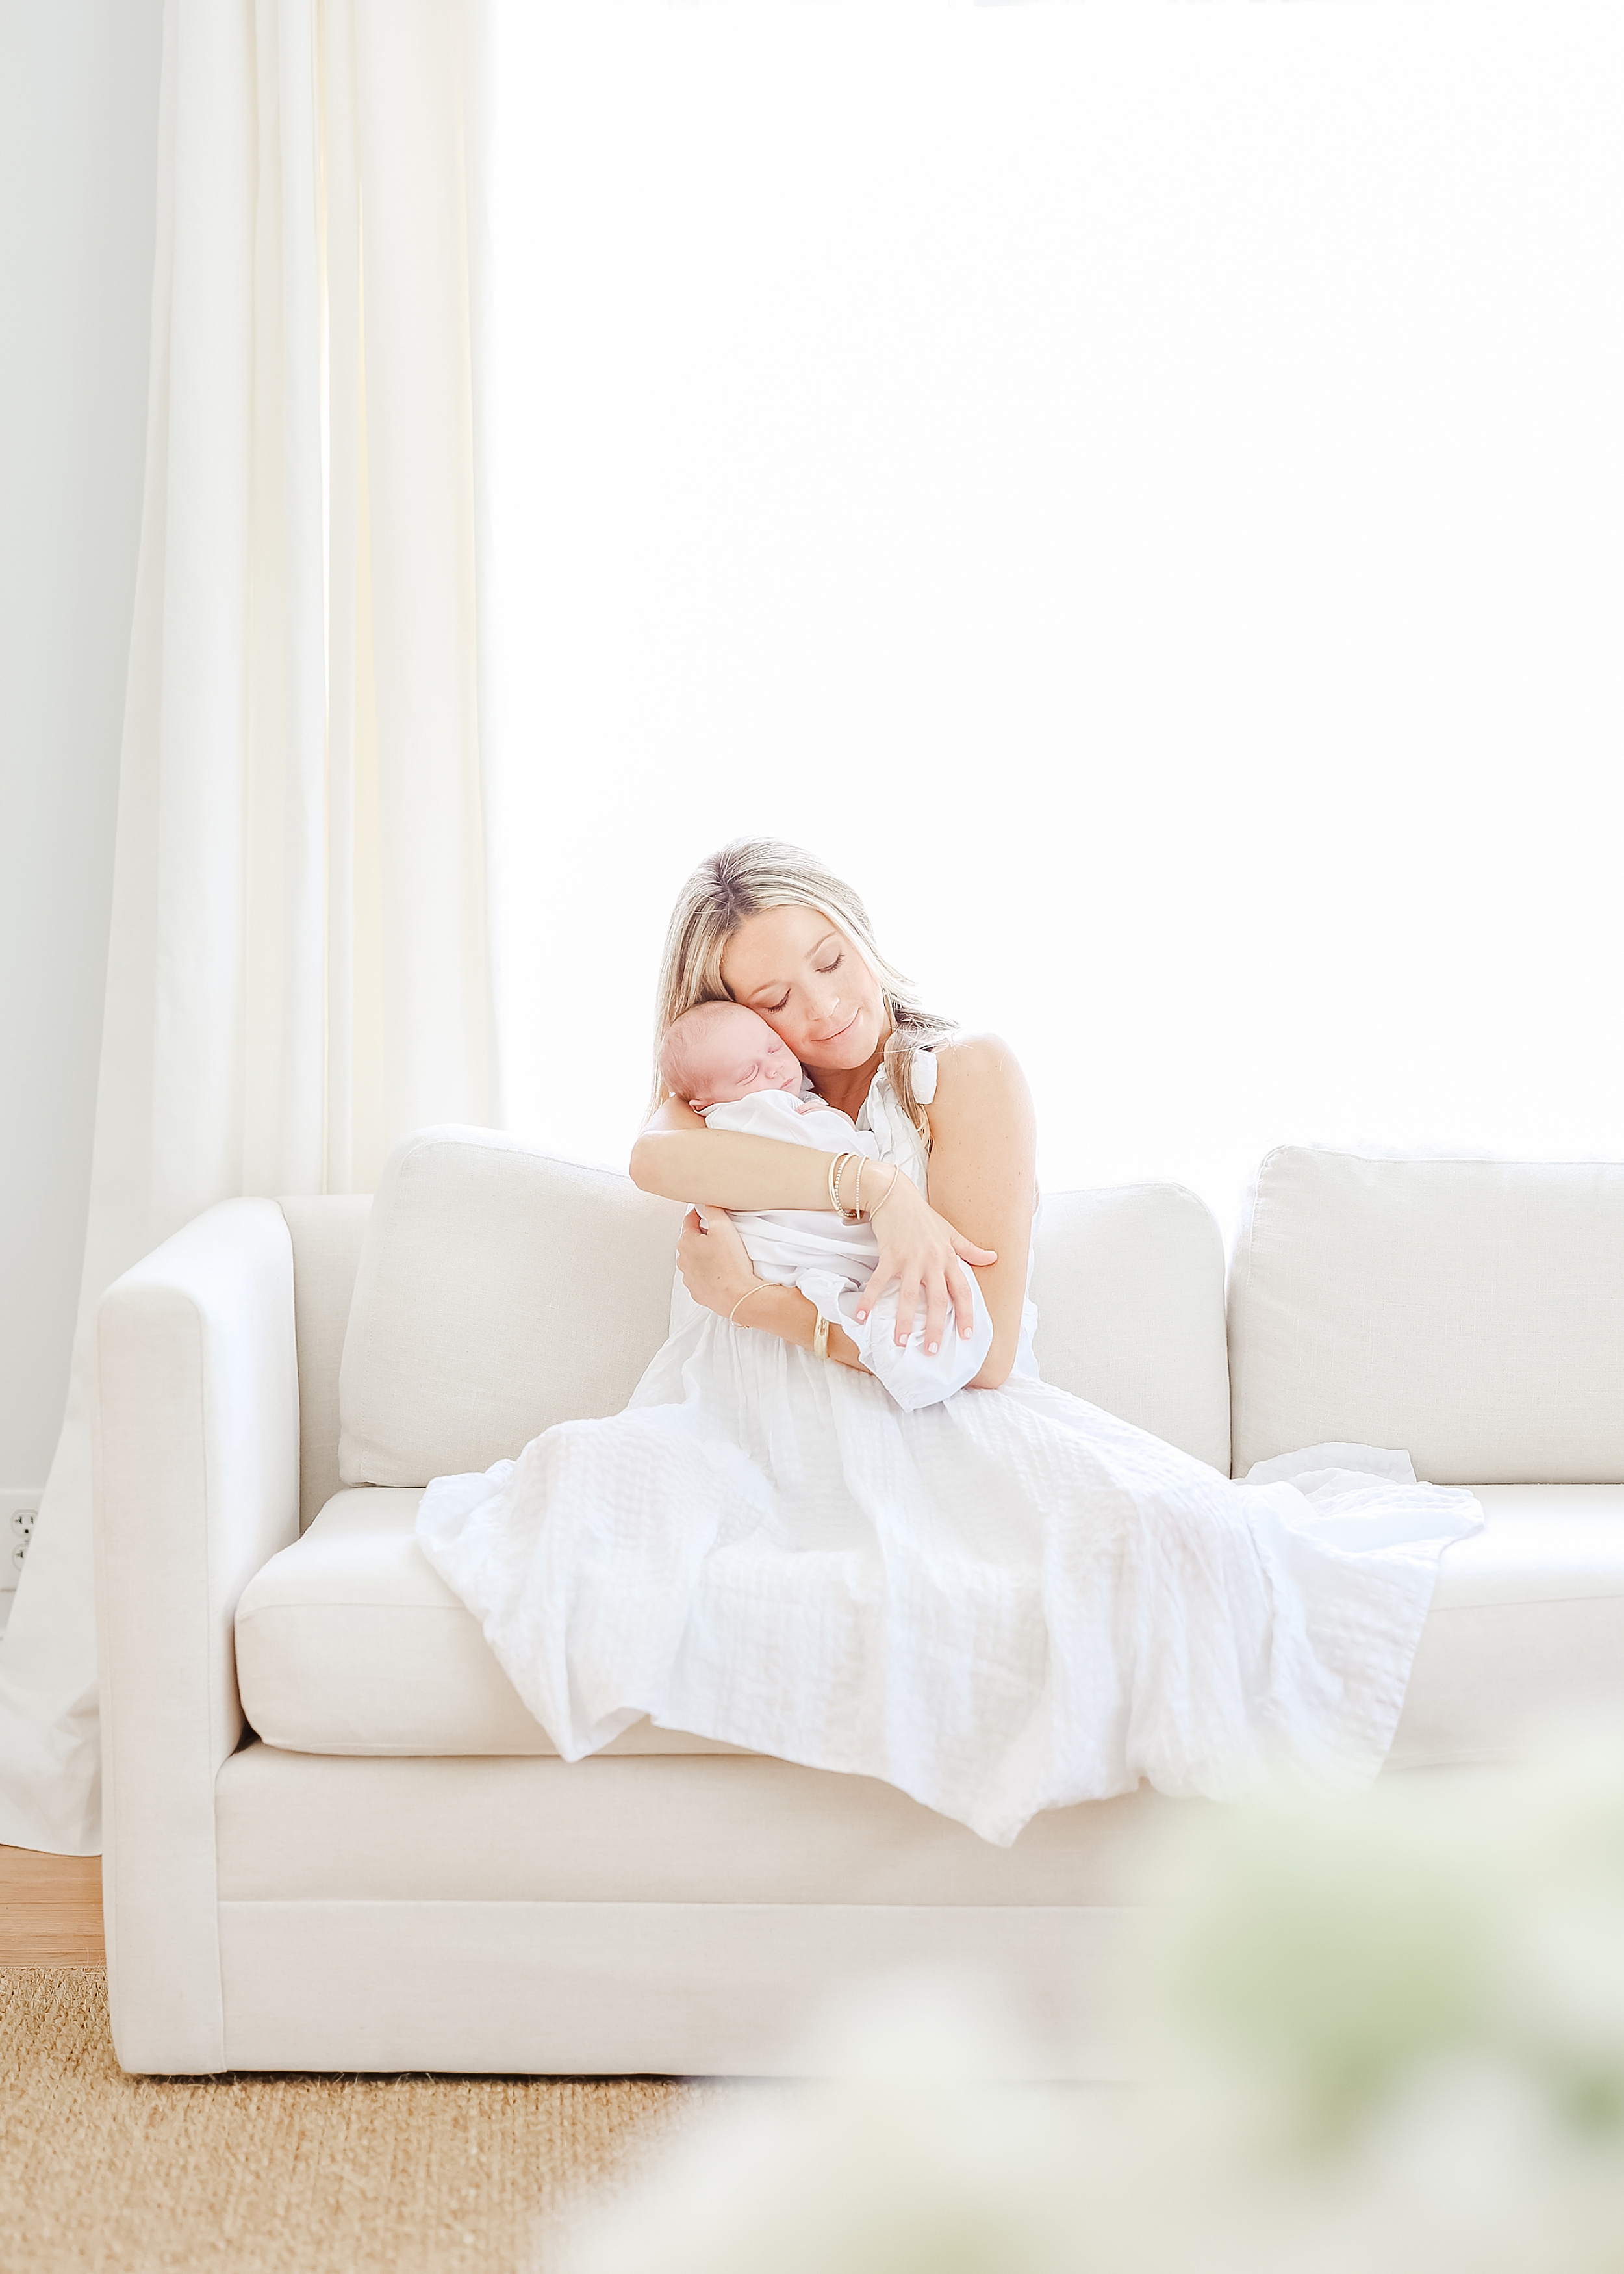 Woman dresses in long white dress holding newborn baby boy on white couch in front of window with sheer airy sunlight.